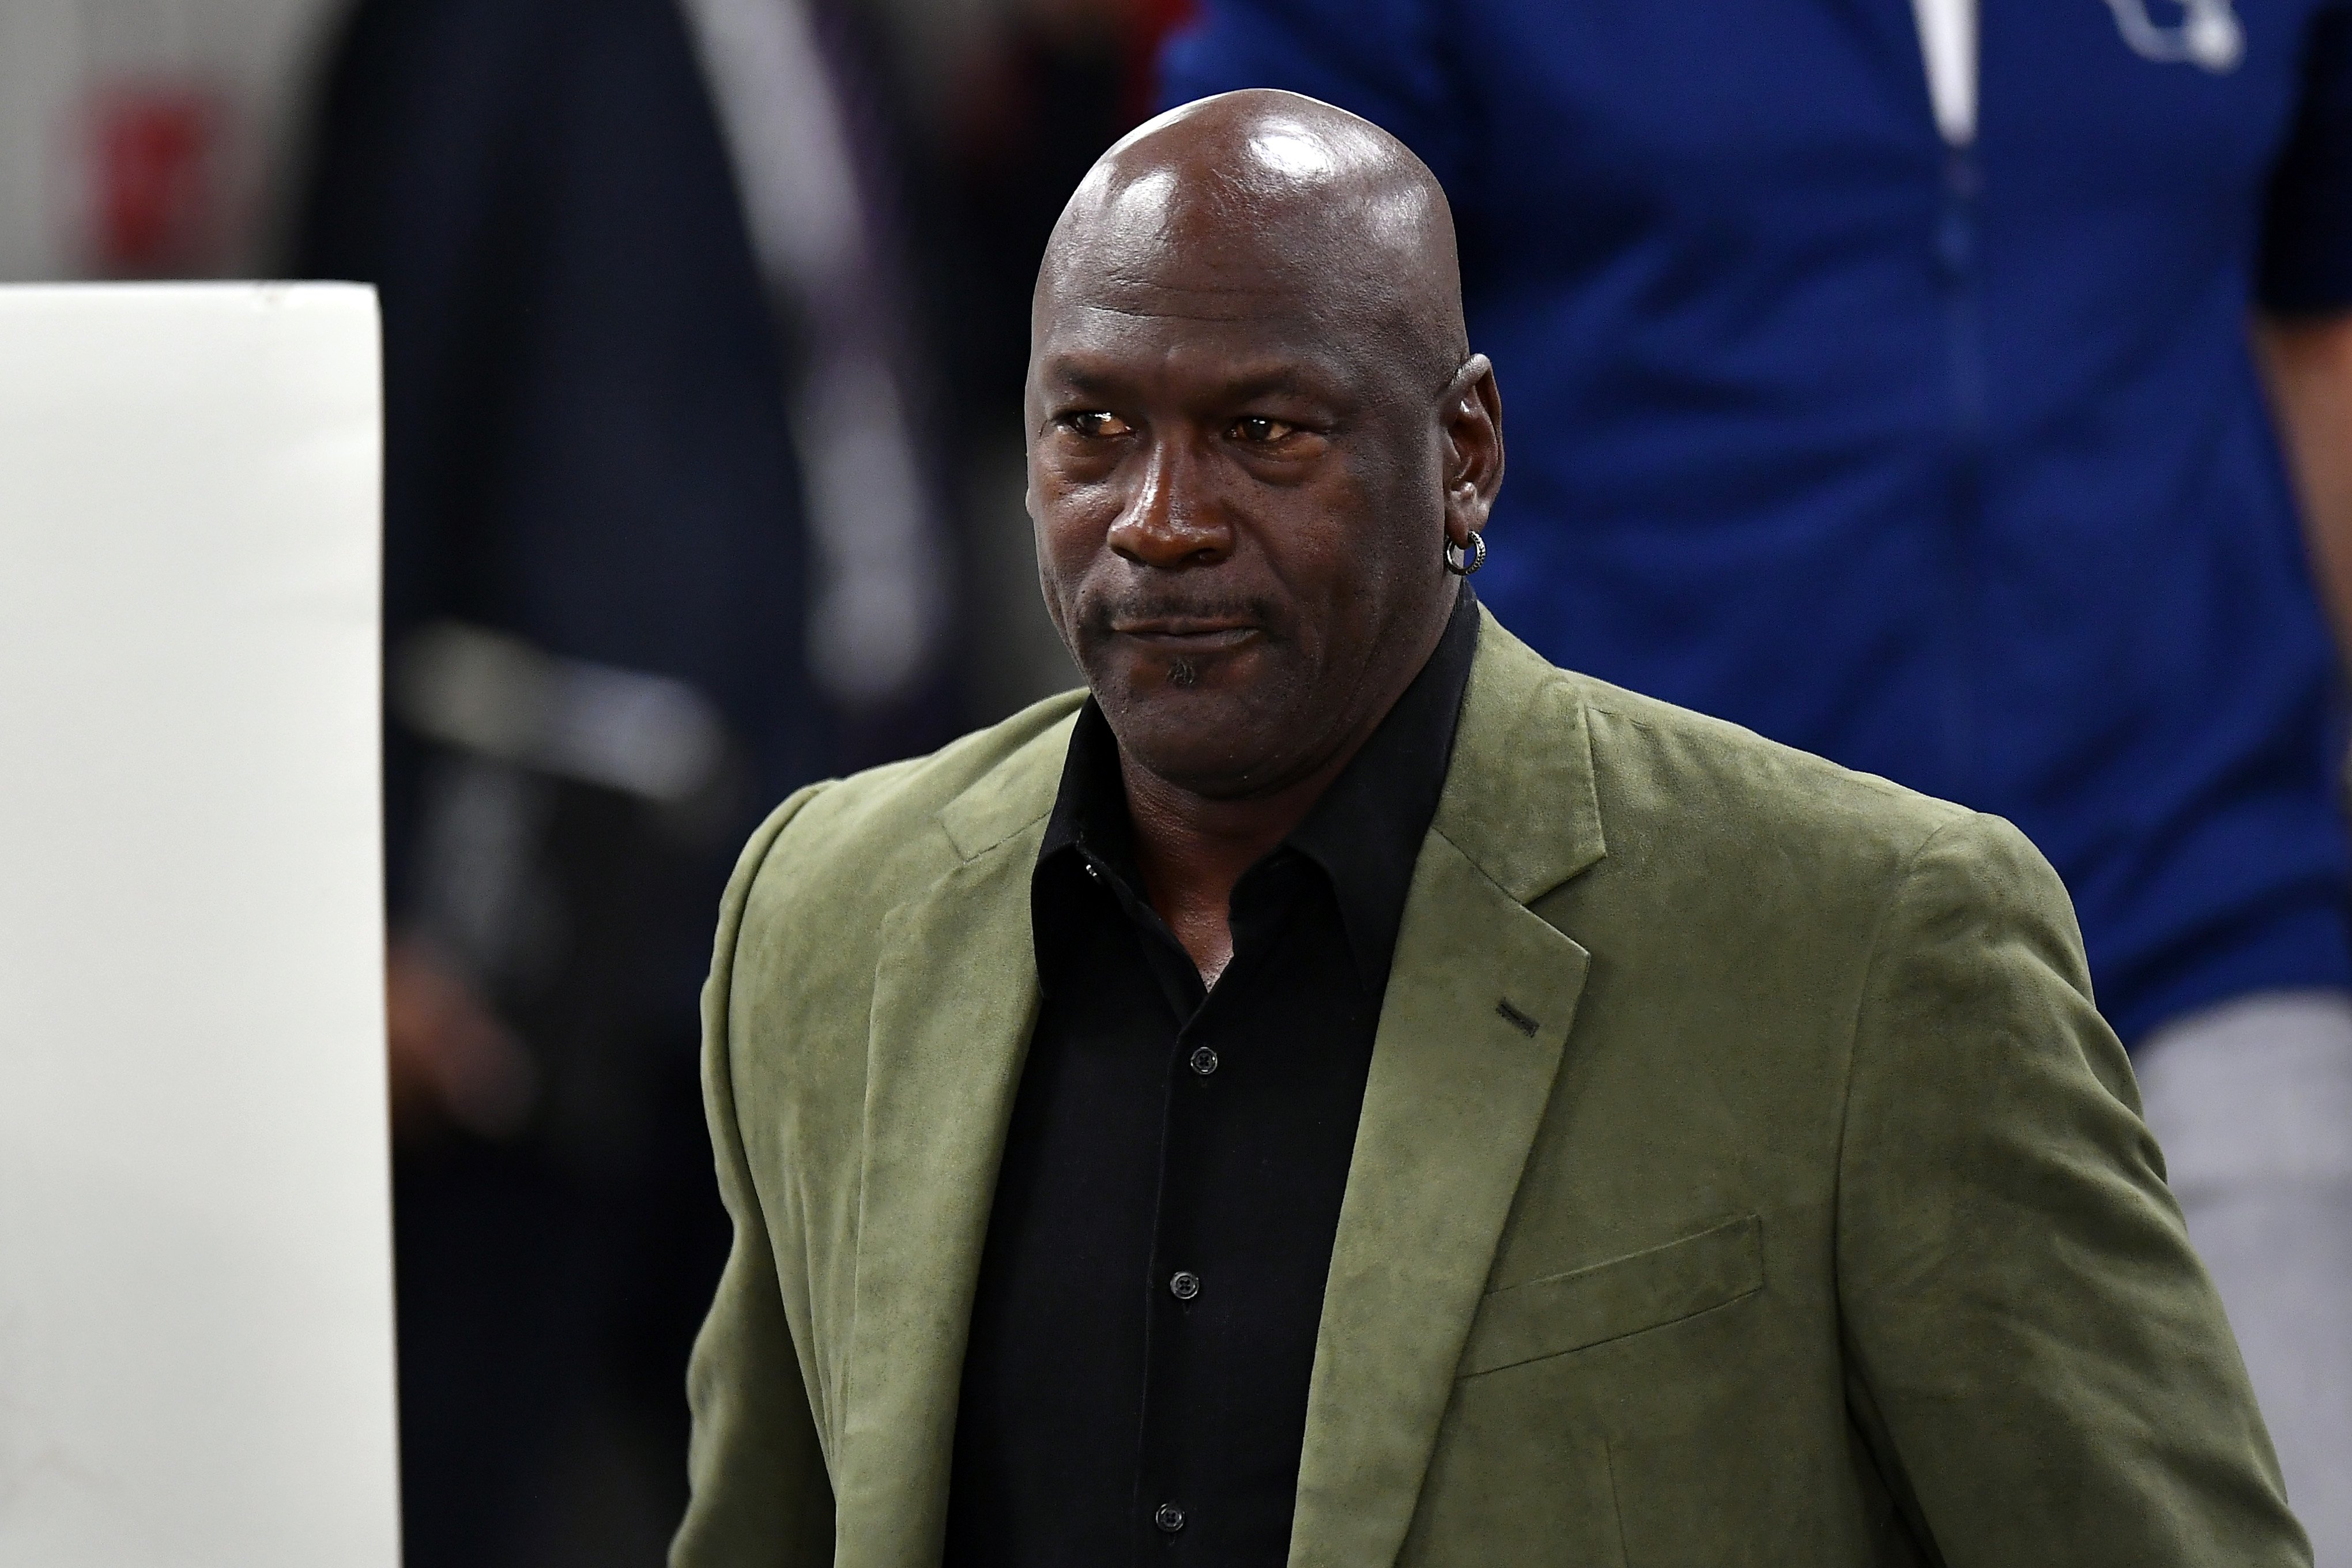 Michael Jordan attends a press conference before the NBA Paris Game match between Charlotte Hornets and Milwaukee Bucks on January 24, 2020 | Photo: GettyImages